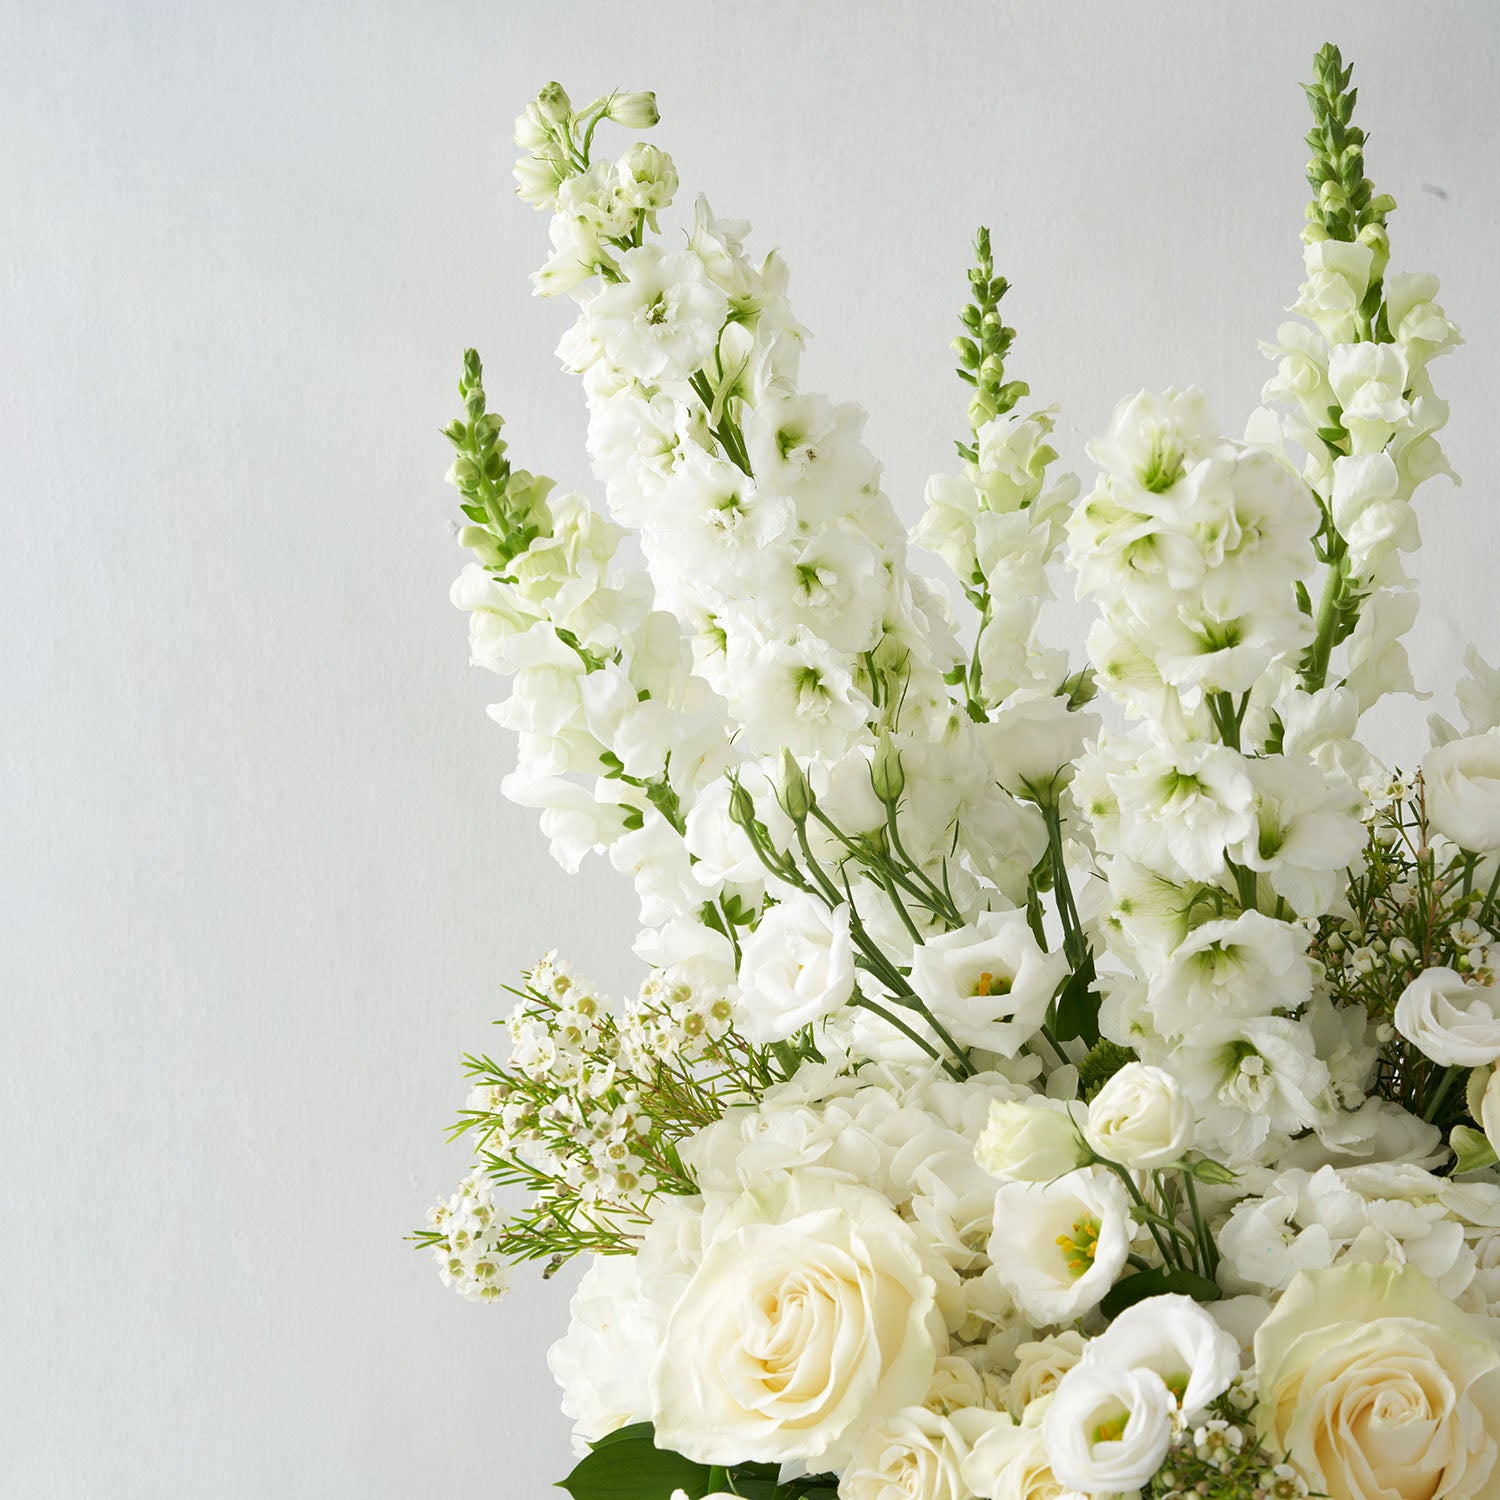 Close up of white roses, snapdragons, delphinium and lisisanthus,  on white background.